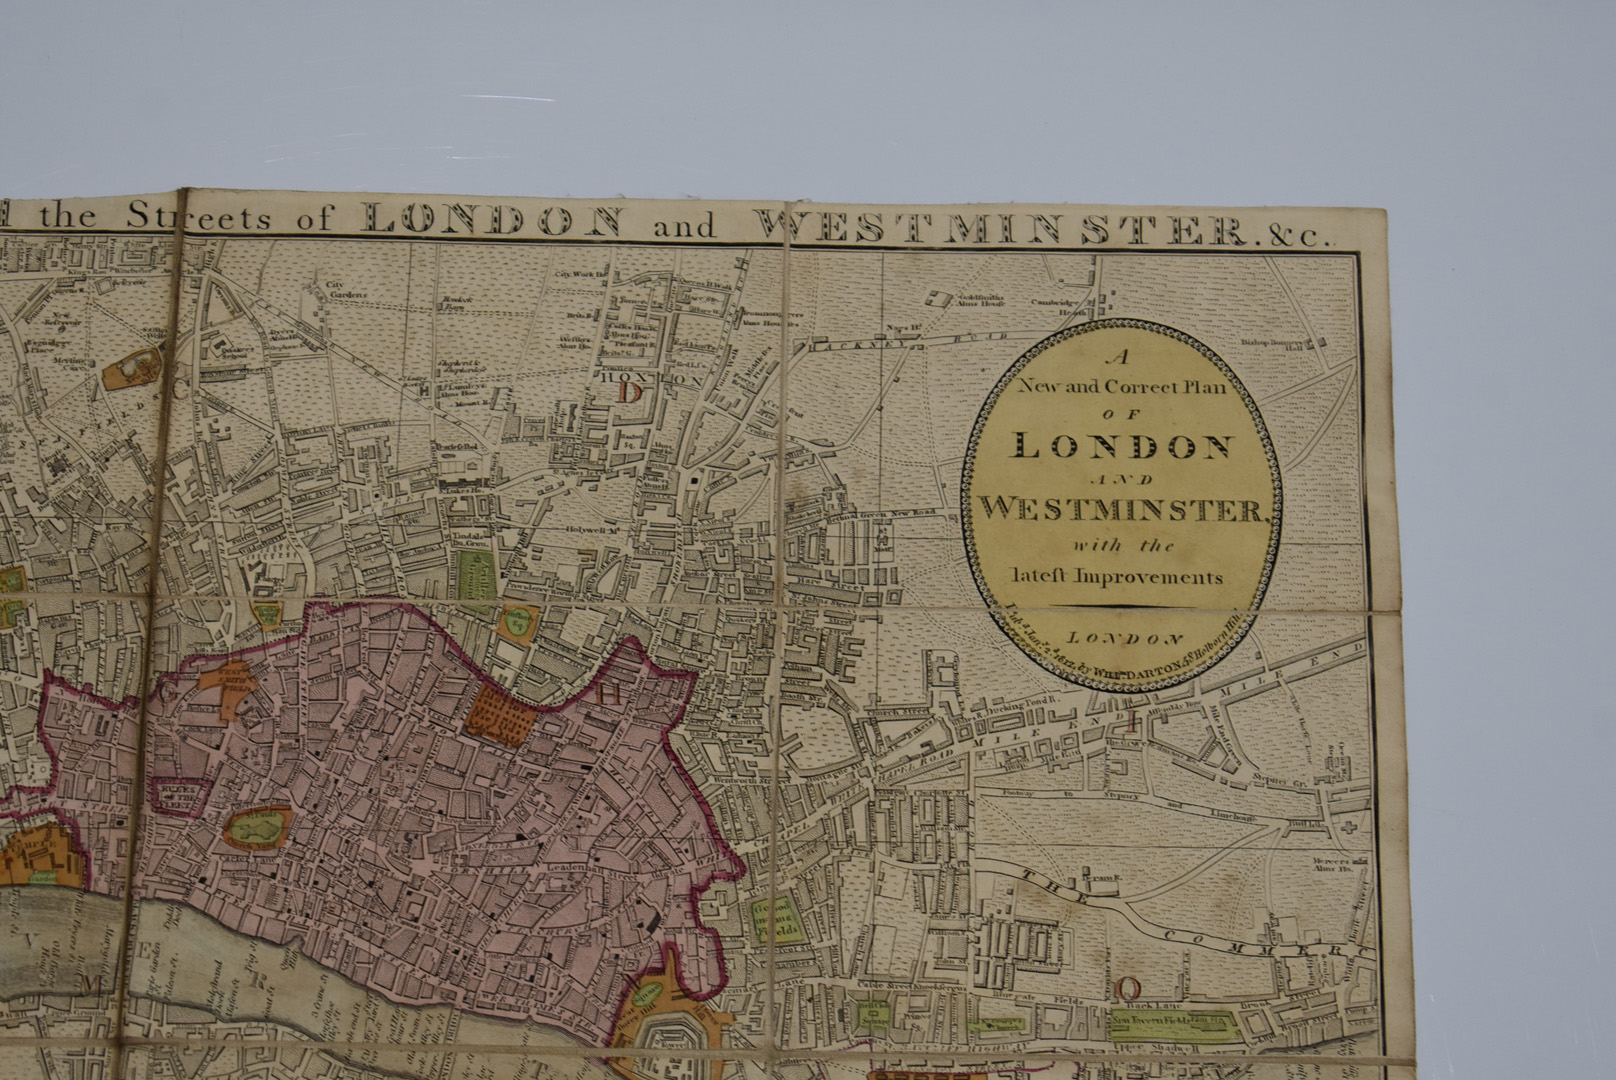 London and Westminster - William Darton, A New and Correct Plan of London and Westminster with the - Image 3 of 7